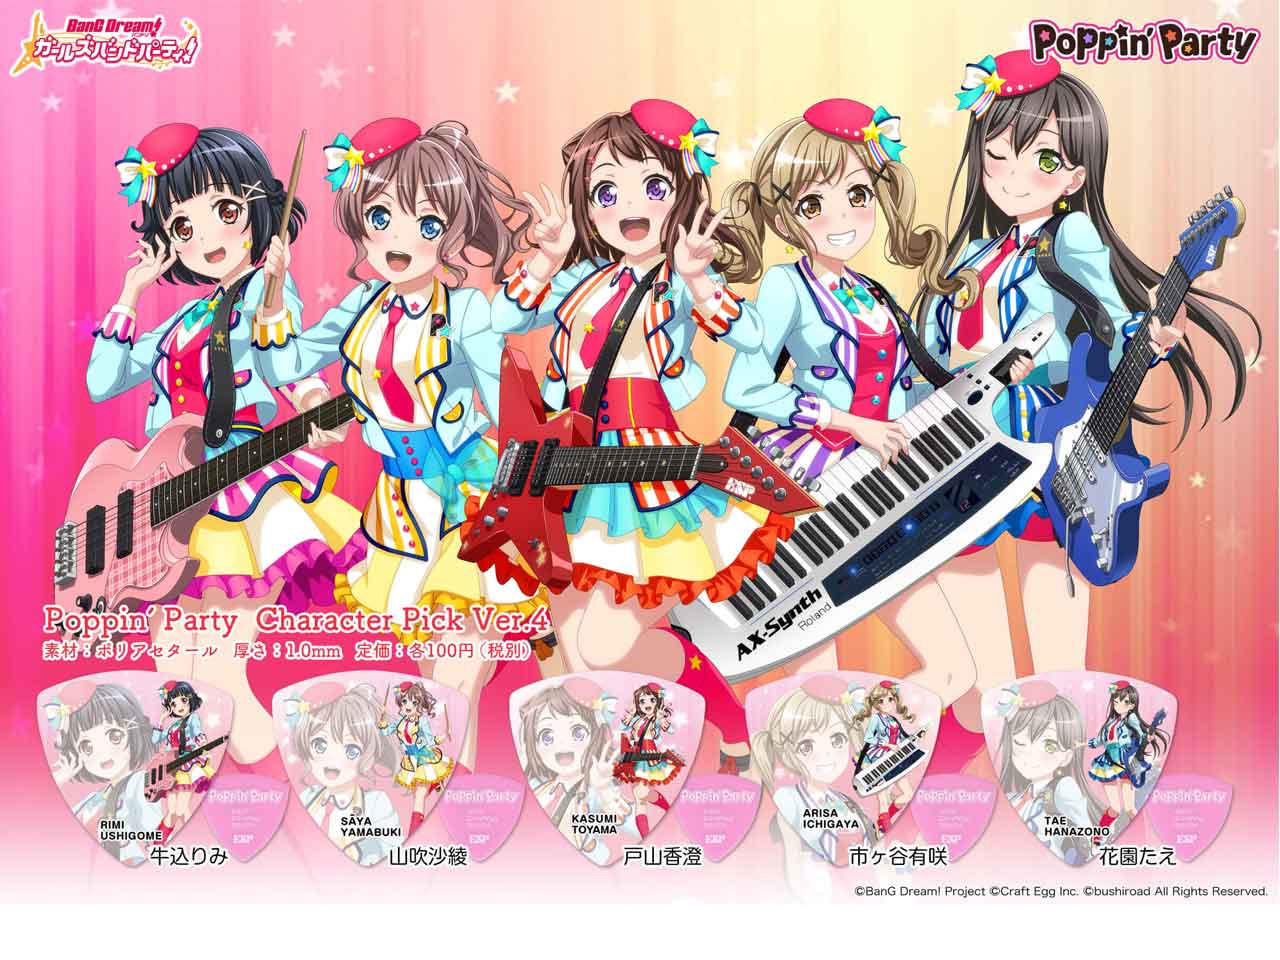 【ESP×BanG Dream!コラボピック】Poppin’Party Character Pick Ver.4 "戸山香澄"（GBP Kasumi Poppin Party 4）＆”ハメパチ” セット